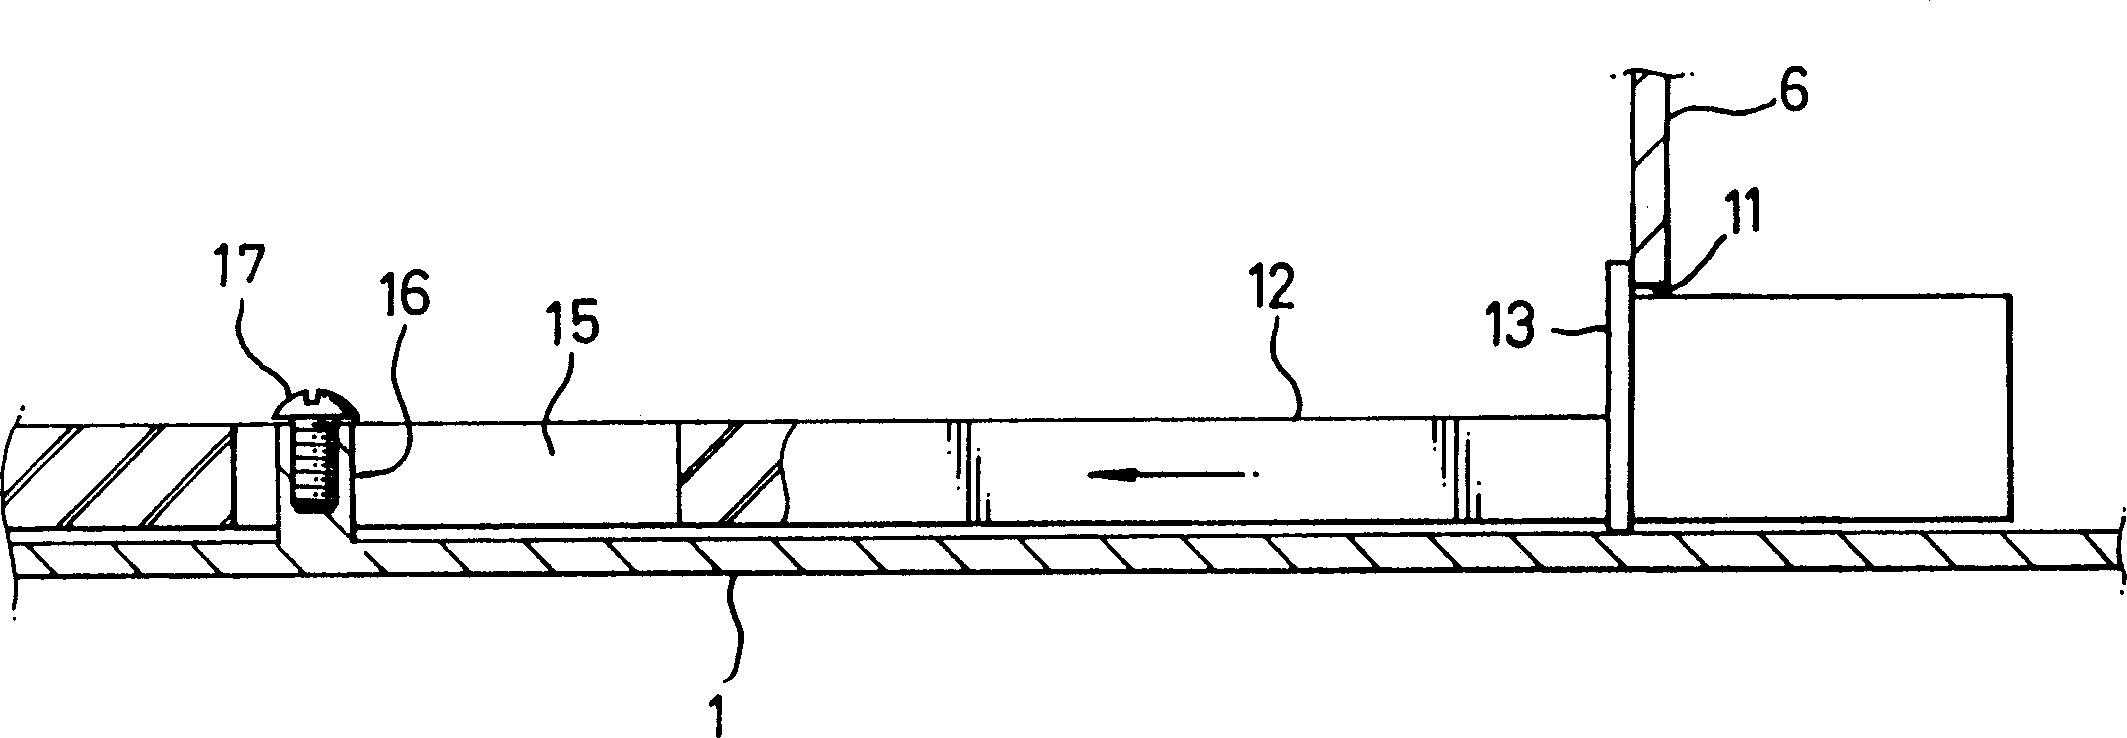 Ventilating device of window type air conditioner